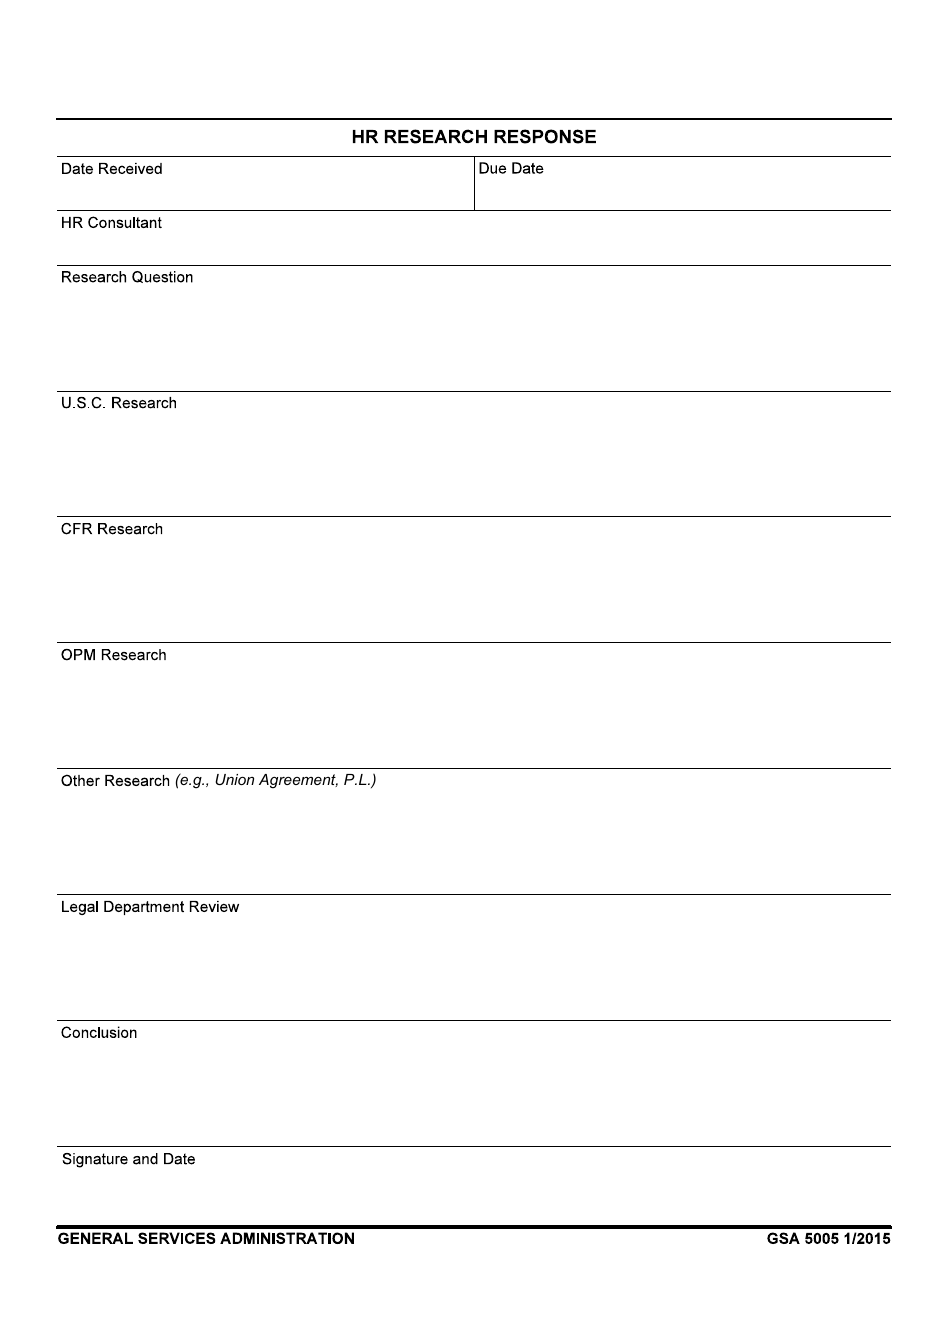 GSA Form 5005 HR Research Response, Page 1